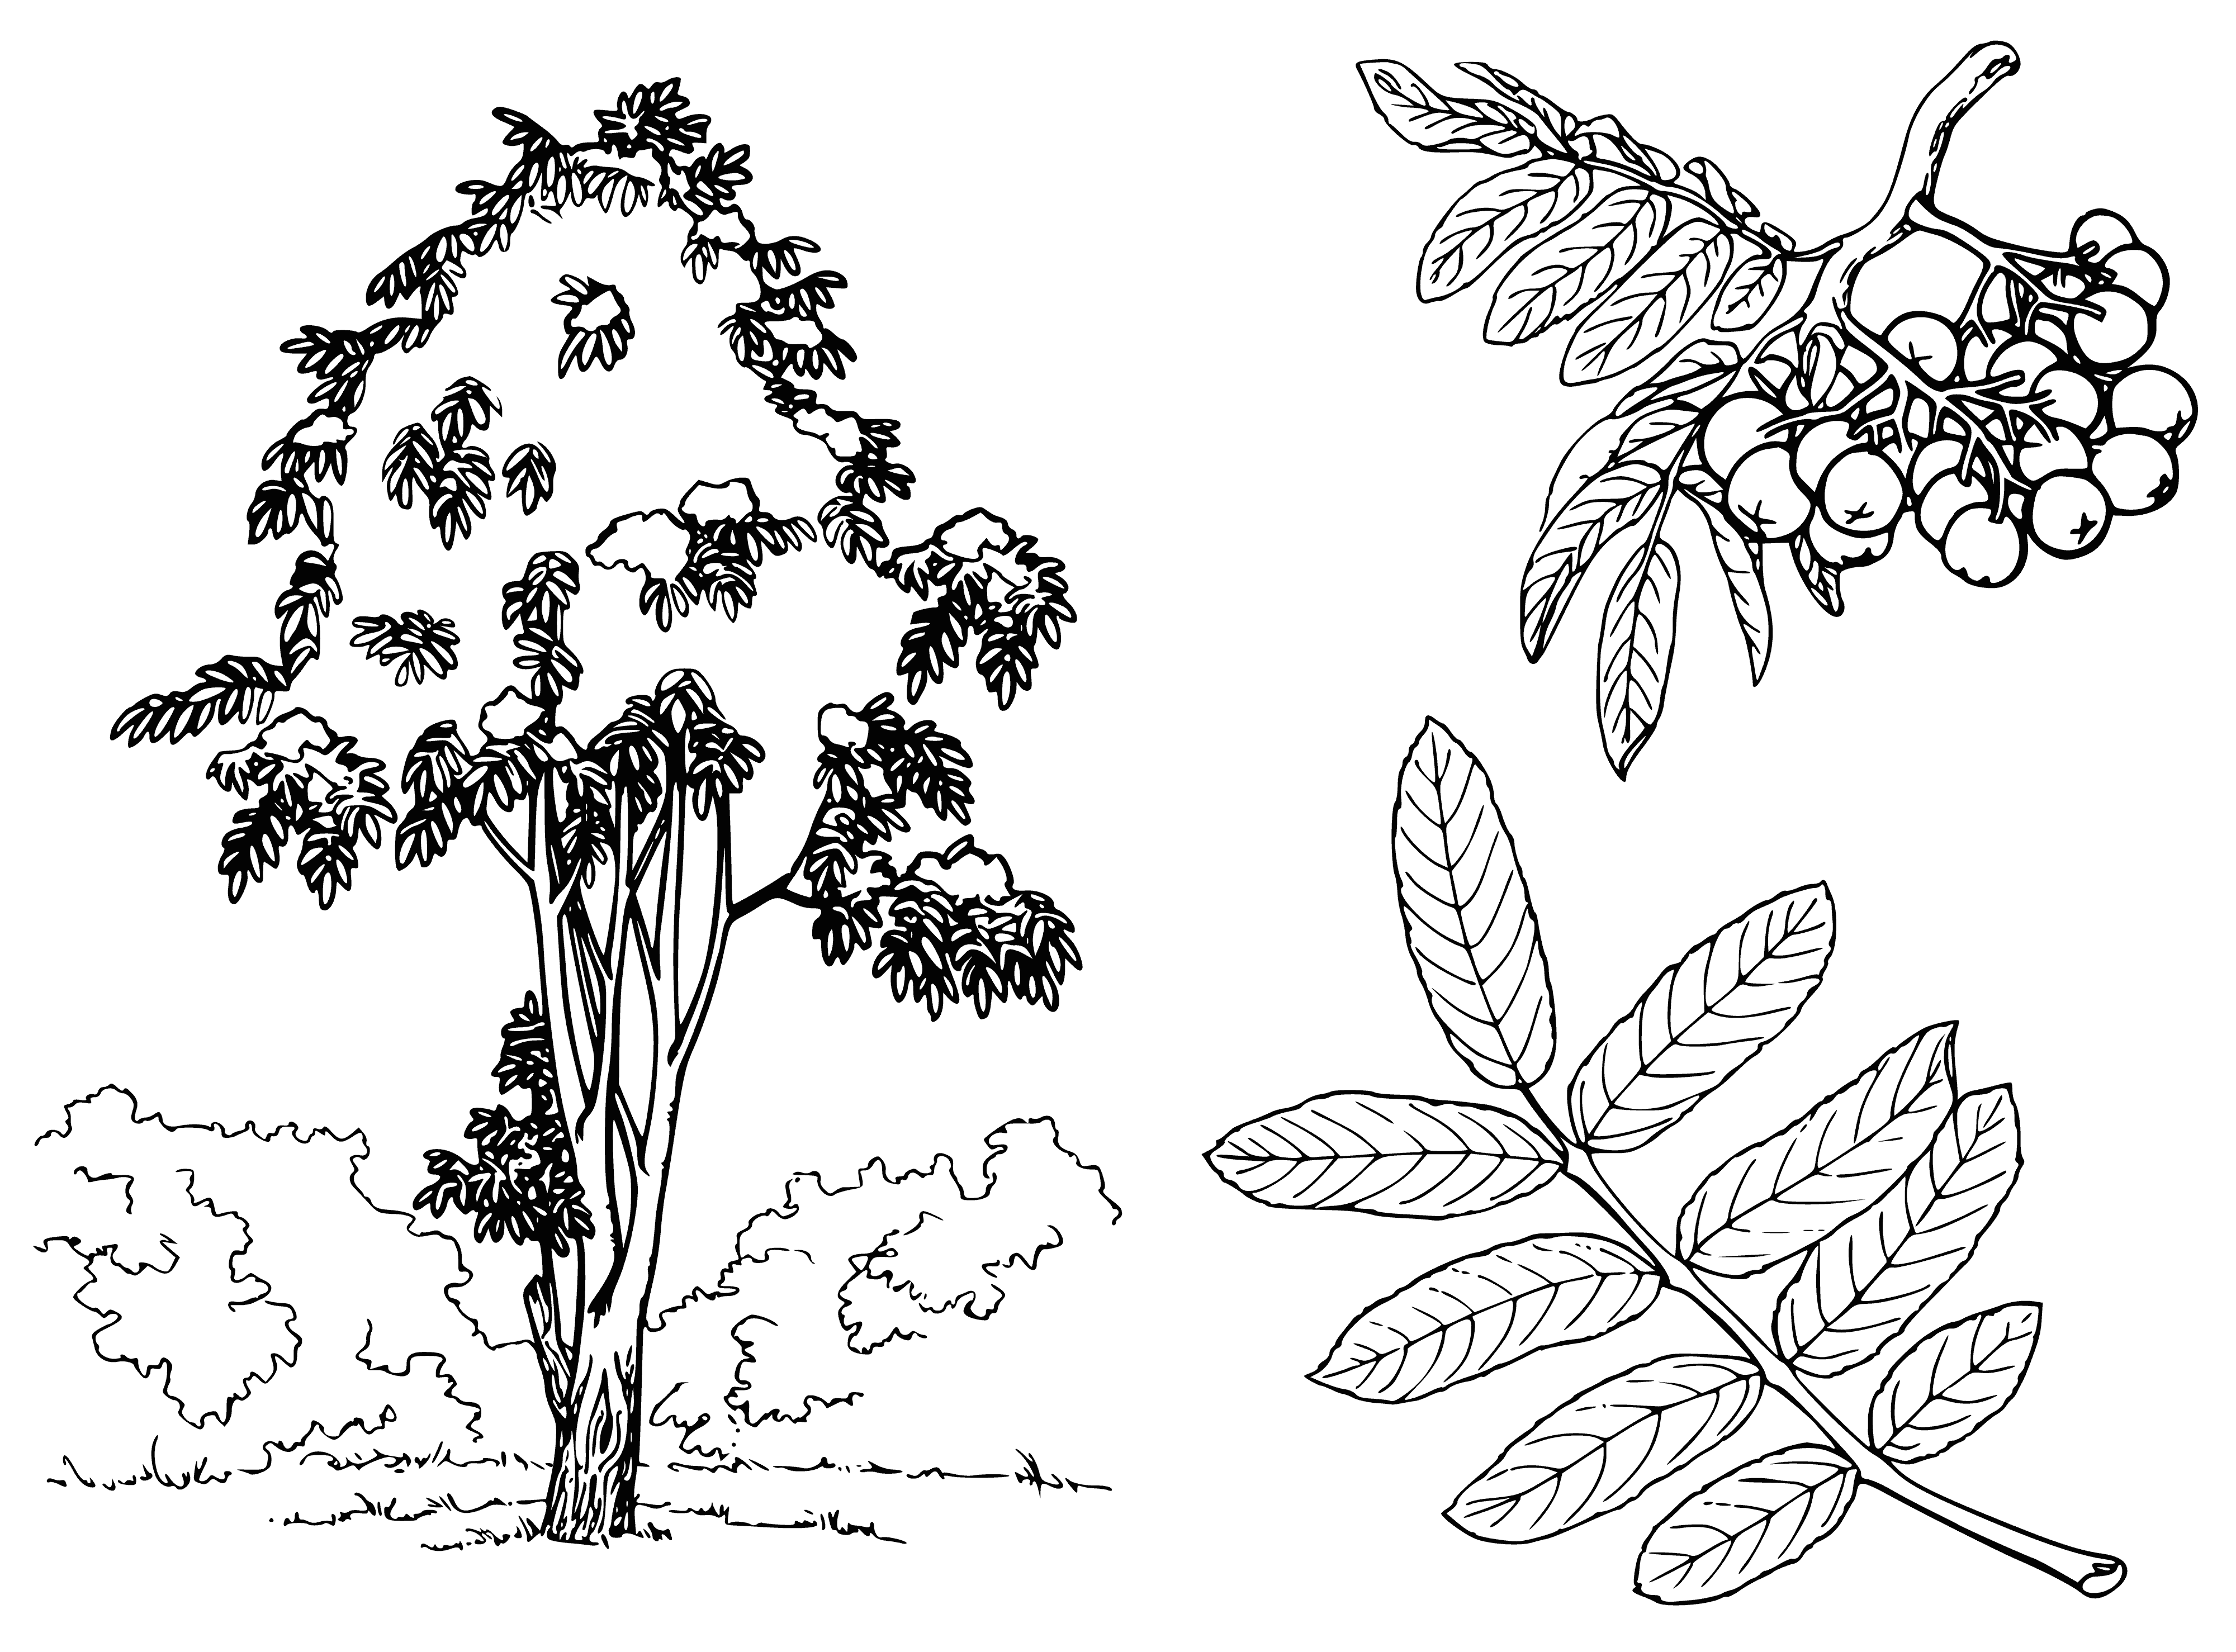 coloring page: Six Rowan trees in a row; tallest has most leaves, shortest has least.